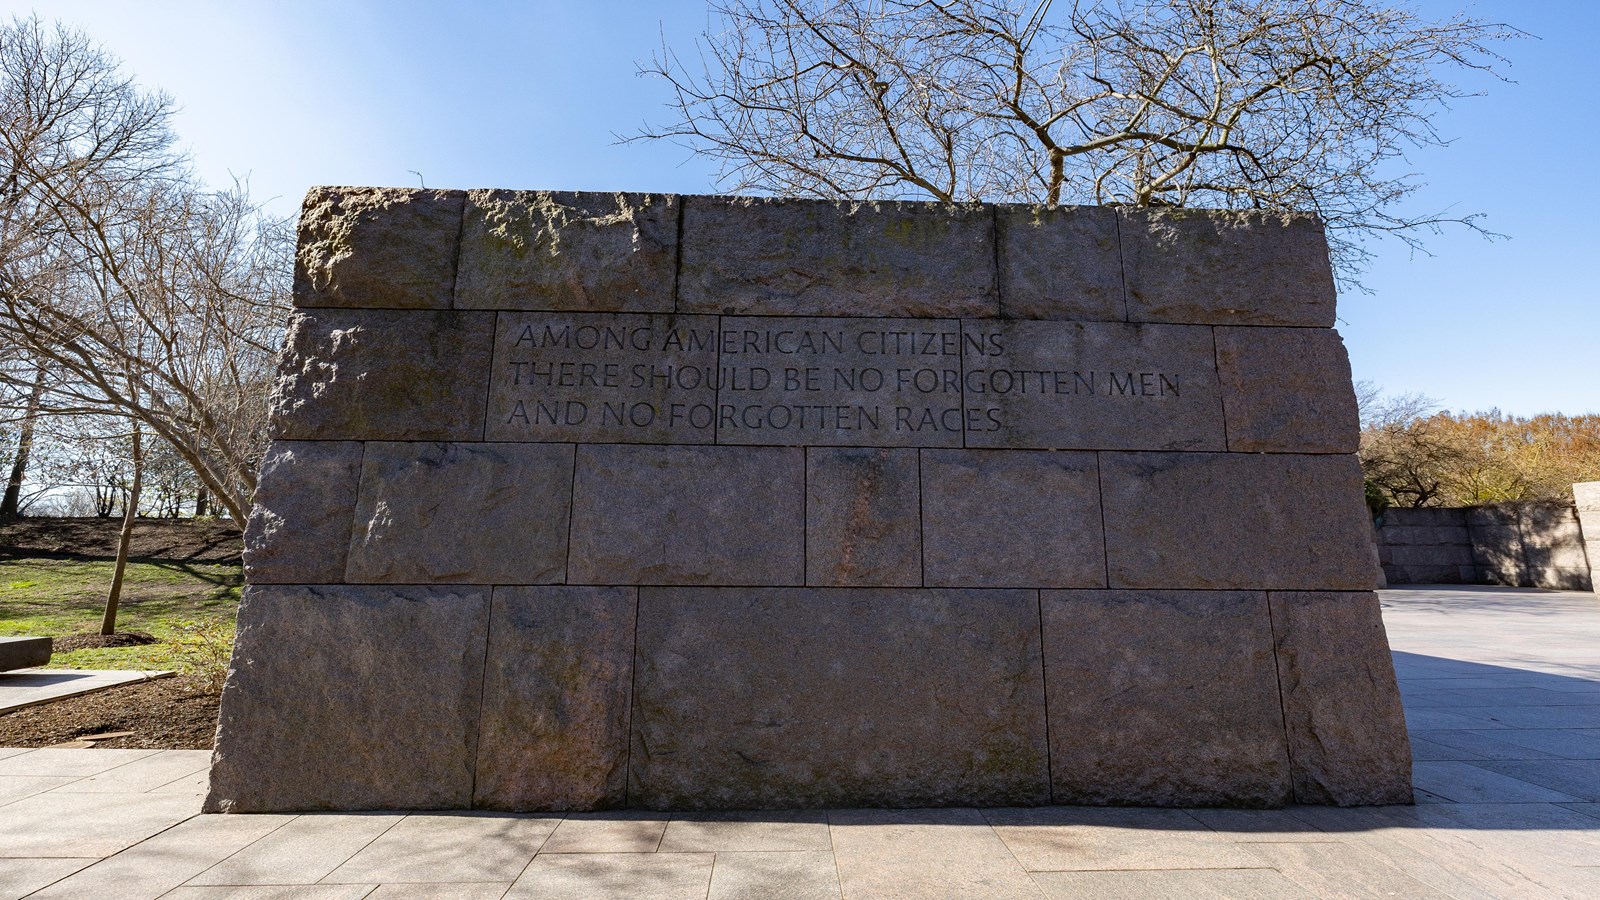 A tall, stone wall has words engraved said by Franklin Roosevelt.